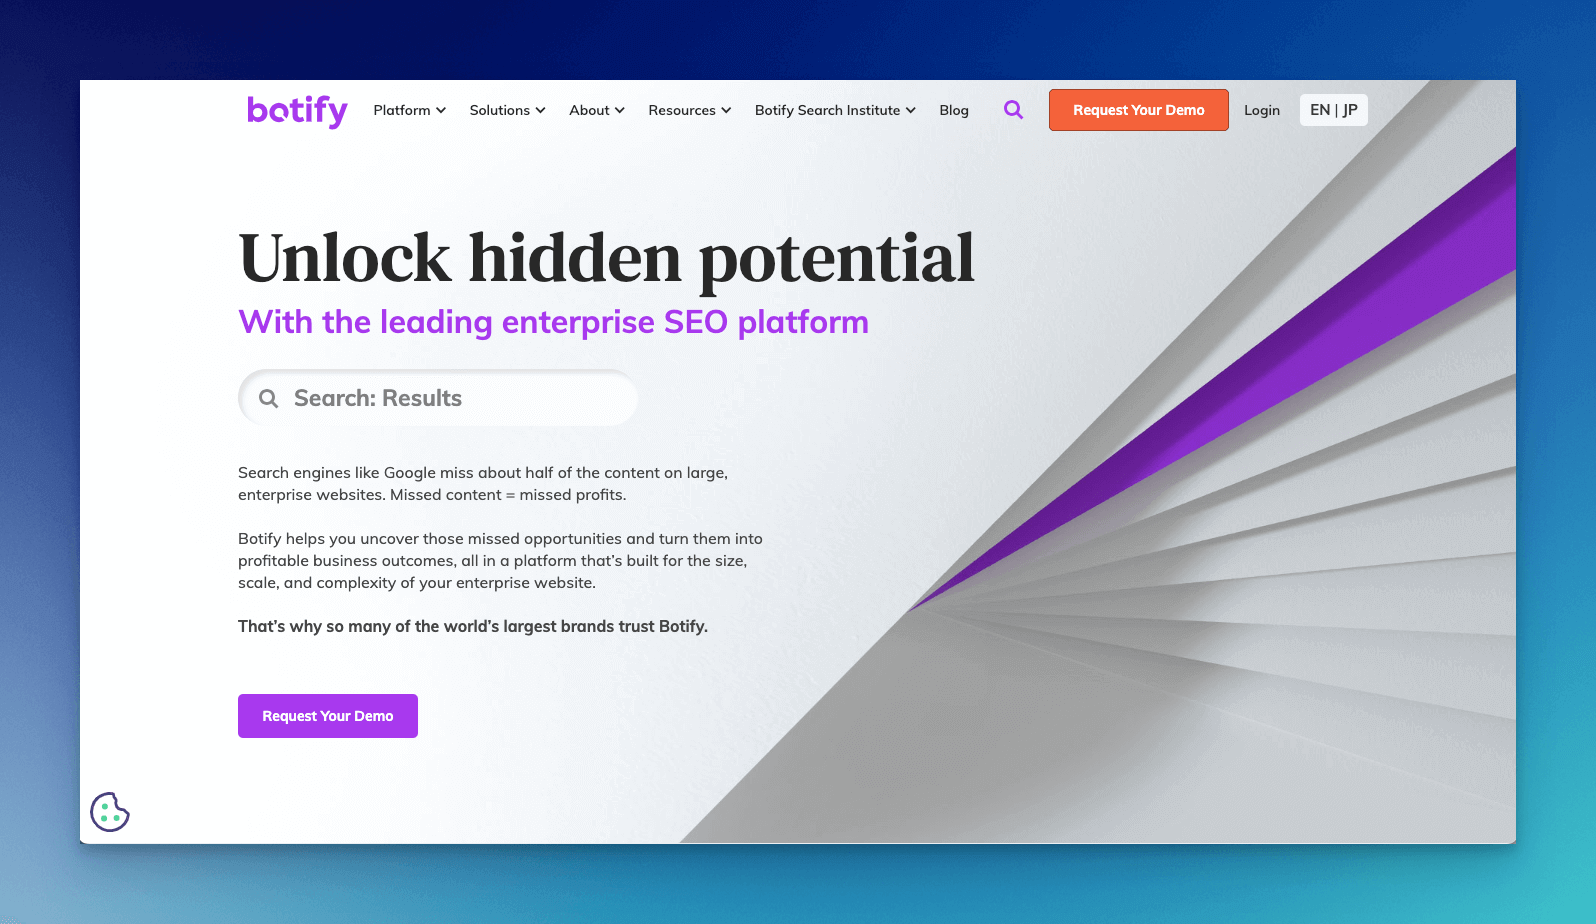 Botify seo crawler tool homepage with a copy in big font that says "unluck hidden potential" and some other texts in little font about the tool